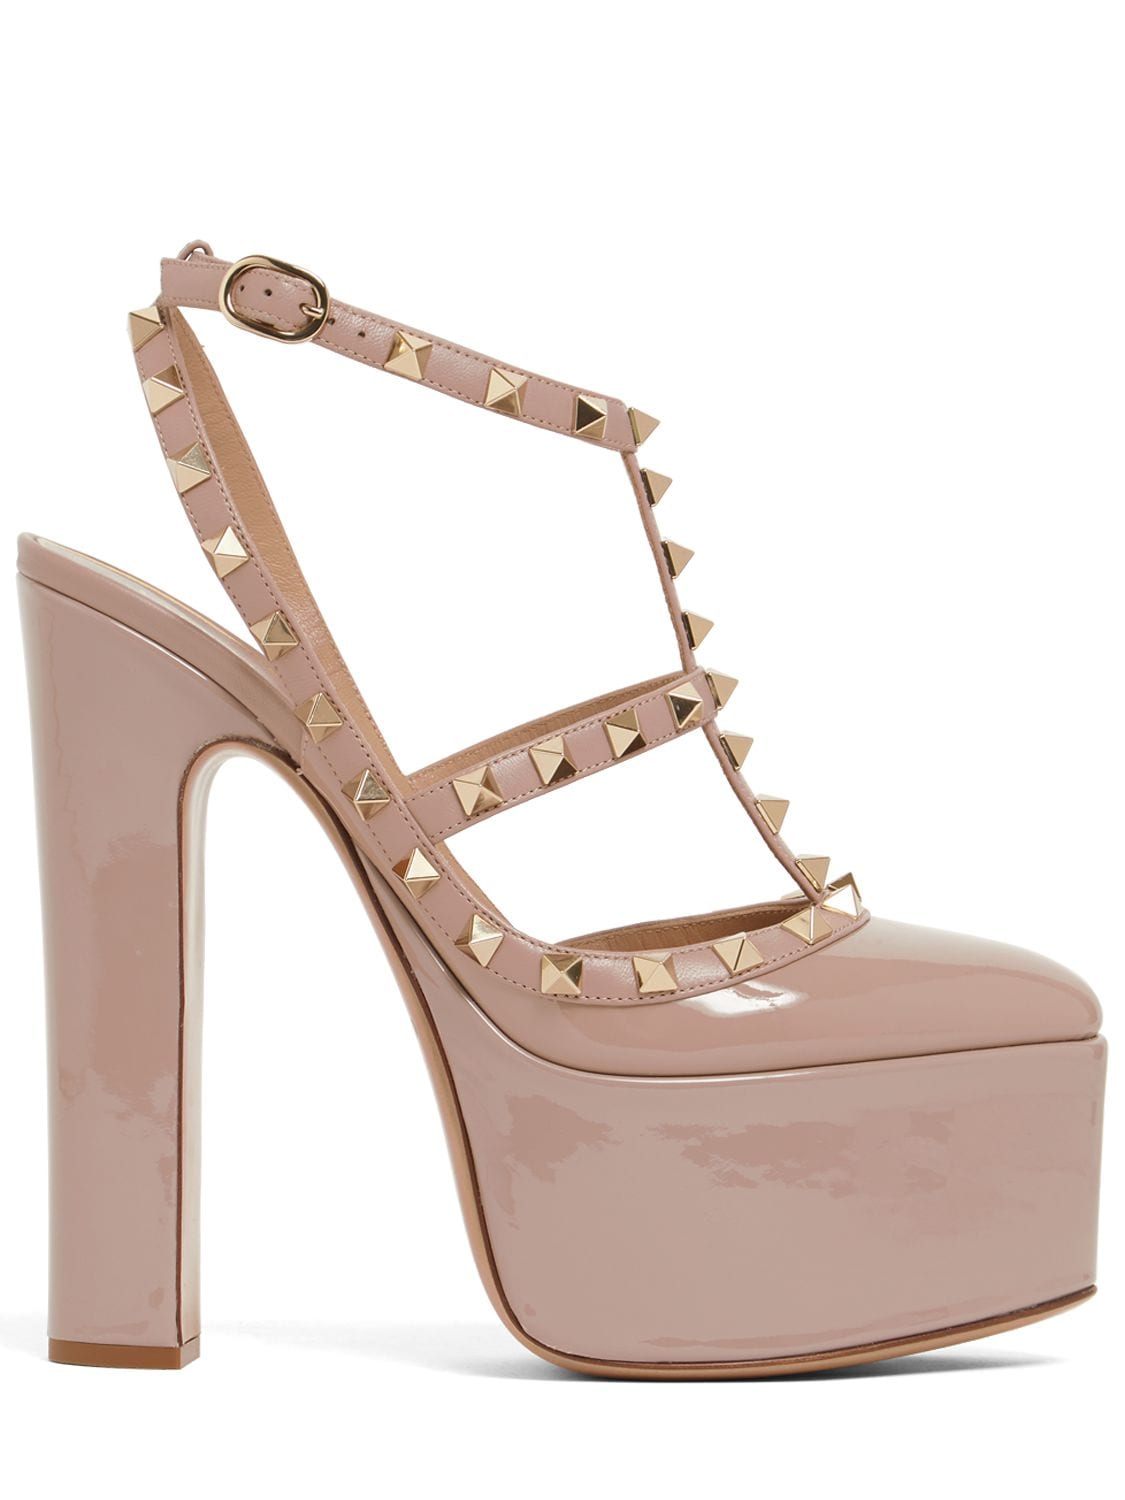 Image of 155mm Rockstud Patent Leather Sandals